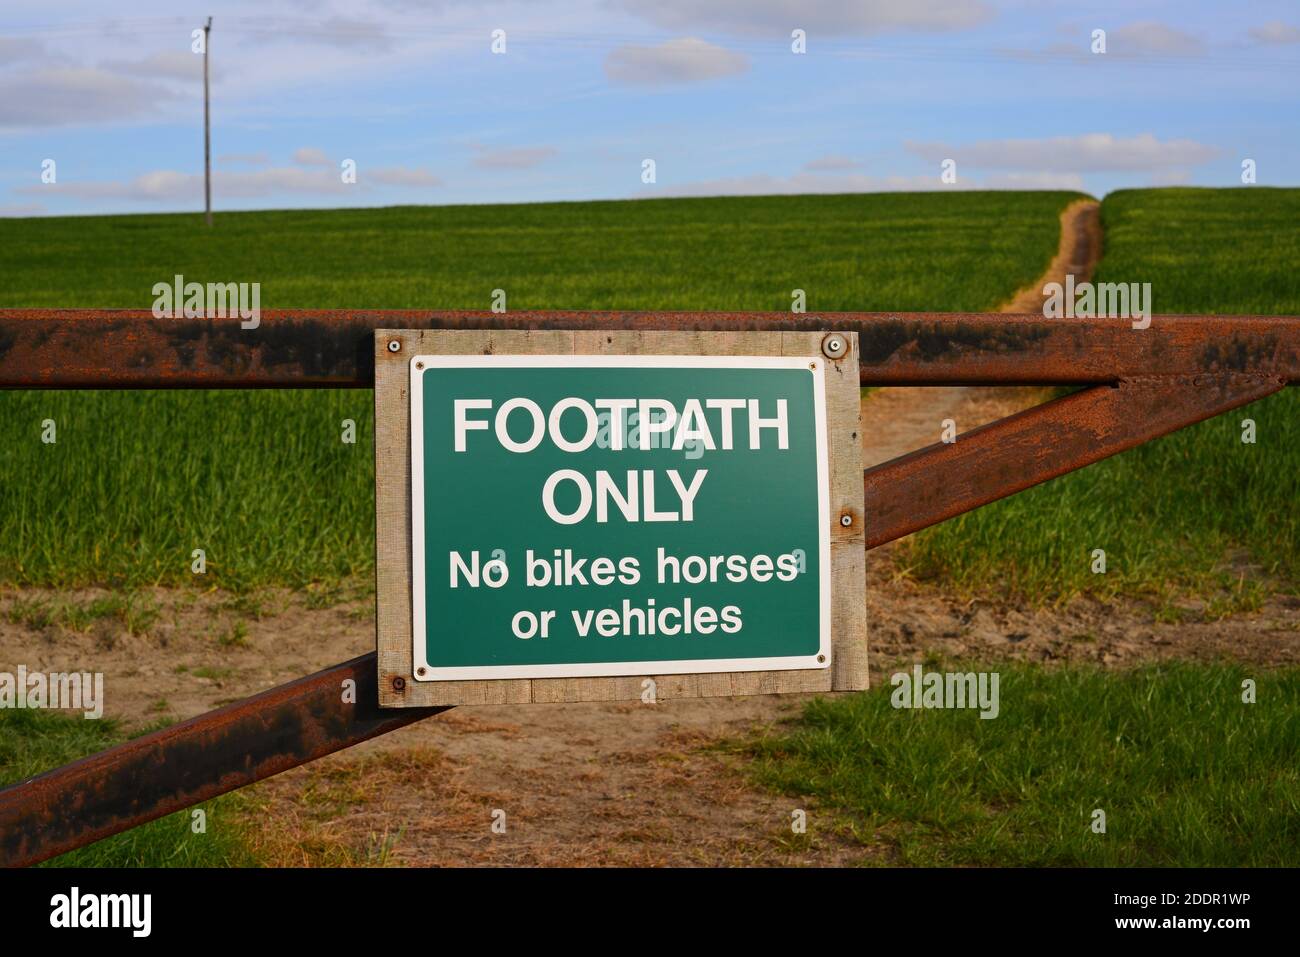 footpath only, no bikes, horses or vehicles at footpath leeds united kingdom Stock Photo